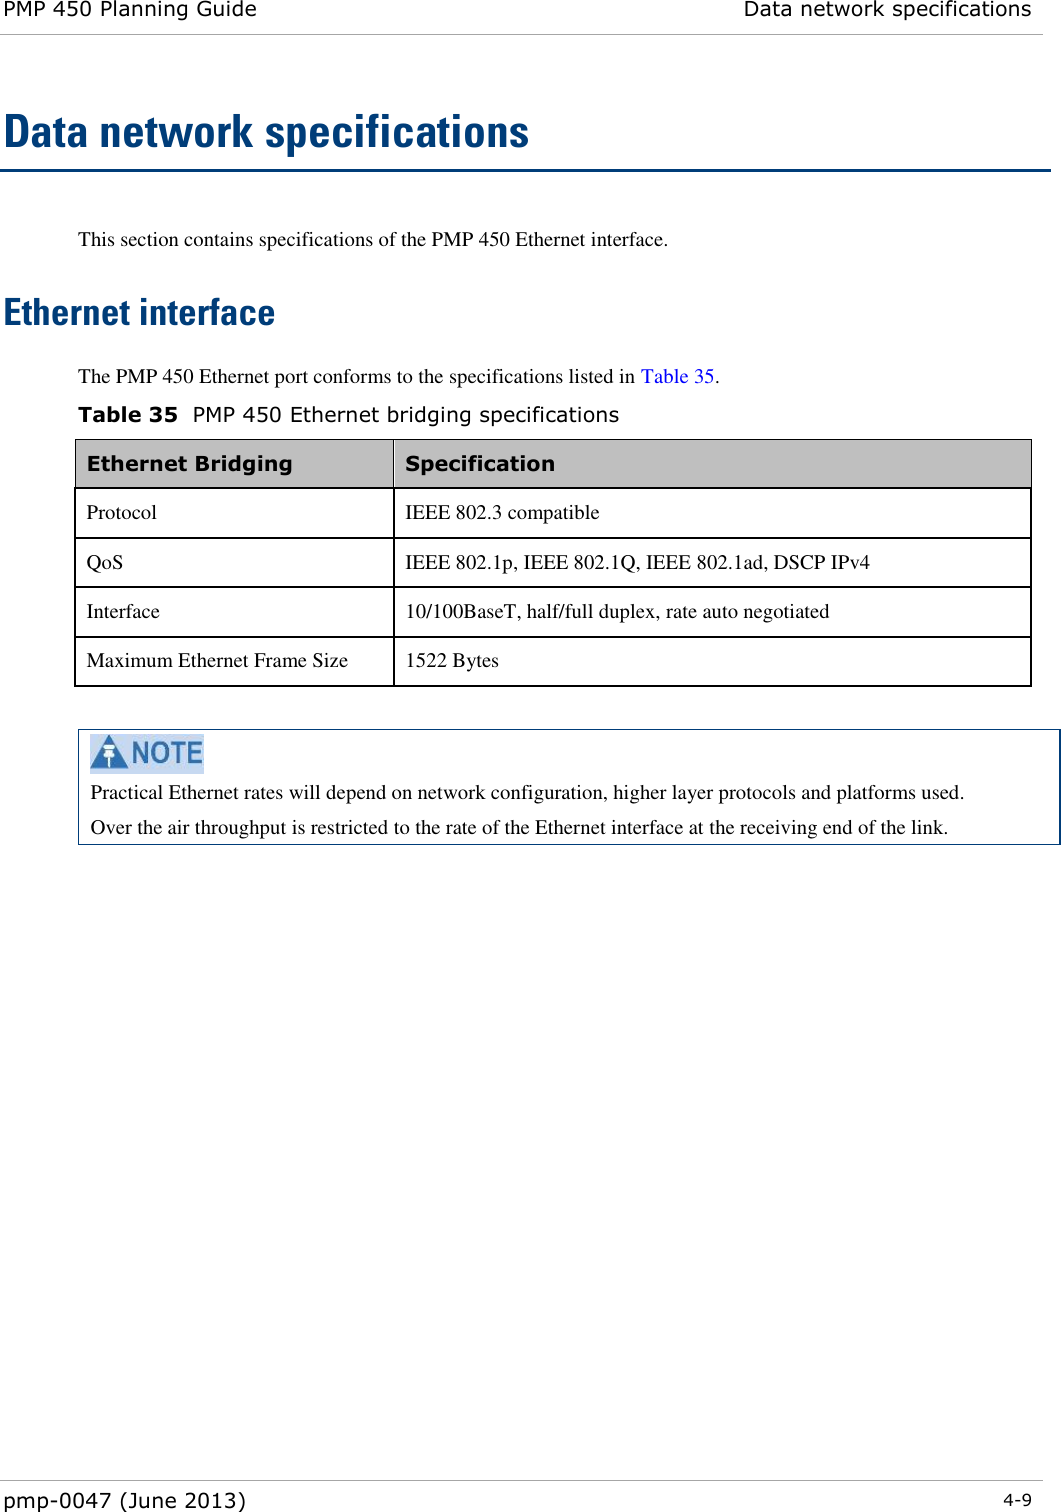 PMP 450 Planning Guide Data network specifications  pmp-0047 (June 2013)  4-9  Data network specifications This section contains specifications of the PMP 450 Ethernet interface. Ethernet interface The PMP 450 Ethernet port conforms to the specifications listed in Table 35. Table 35  PMP 450 Ethernet bridging specifications Ethernet Bridging  Specification Protocol  IEEE 802.3 compatible QoS IEEE 802.1p, IEEE 802.1Q, IEEE 802.1ad, DSCP IPv4 Interface  10/100BaseT, half/full duplex, rate auto negotiated Maximum Ethernet Frame Size 1522 Bytes   Practical Ethernet rates will depend on network configuration, higher layer protocols and platforms used. Over the air throughput is restricted to the rate of the Ethernet interface at the receiving end of the link.  